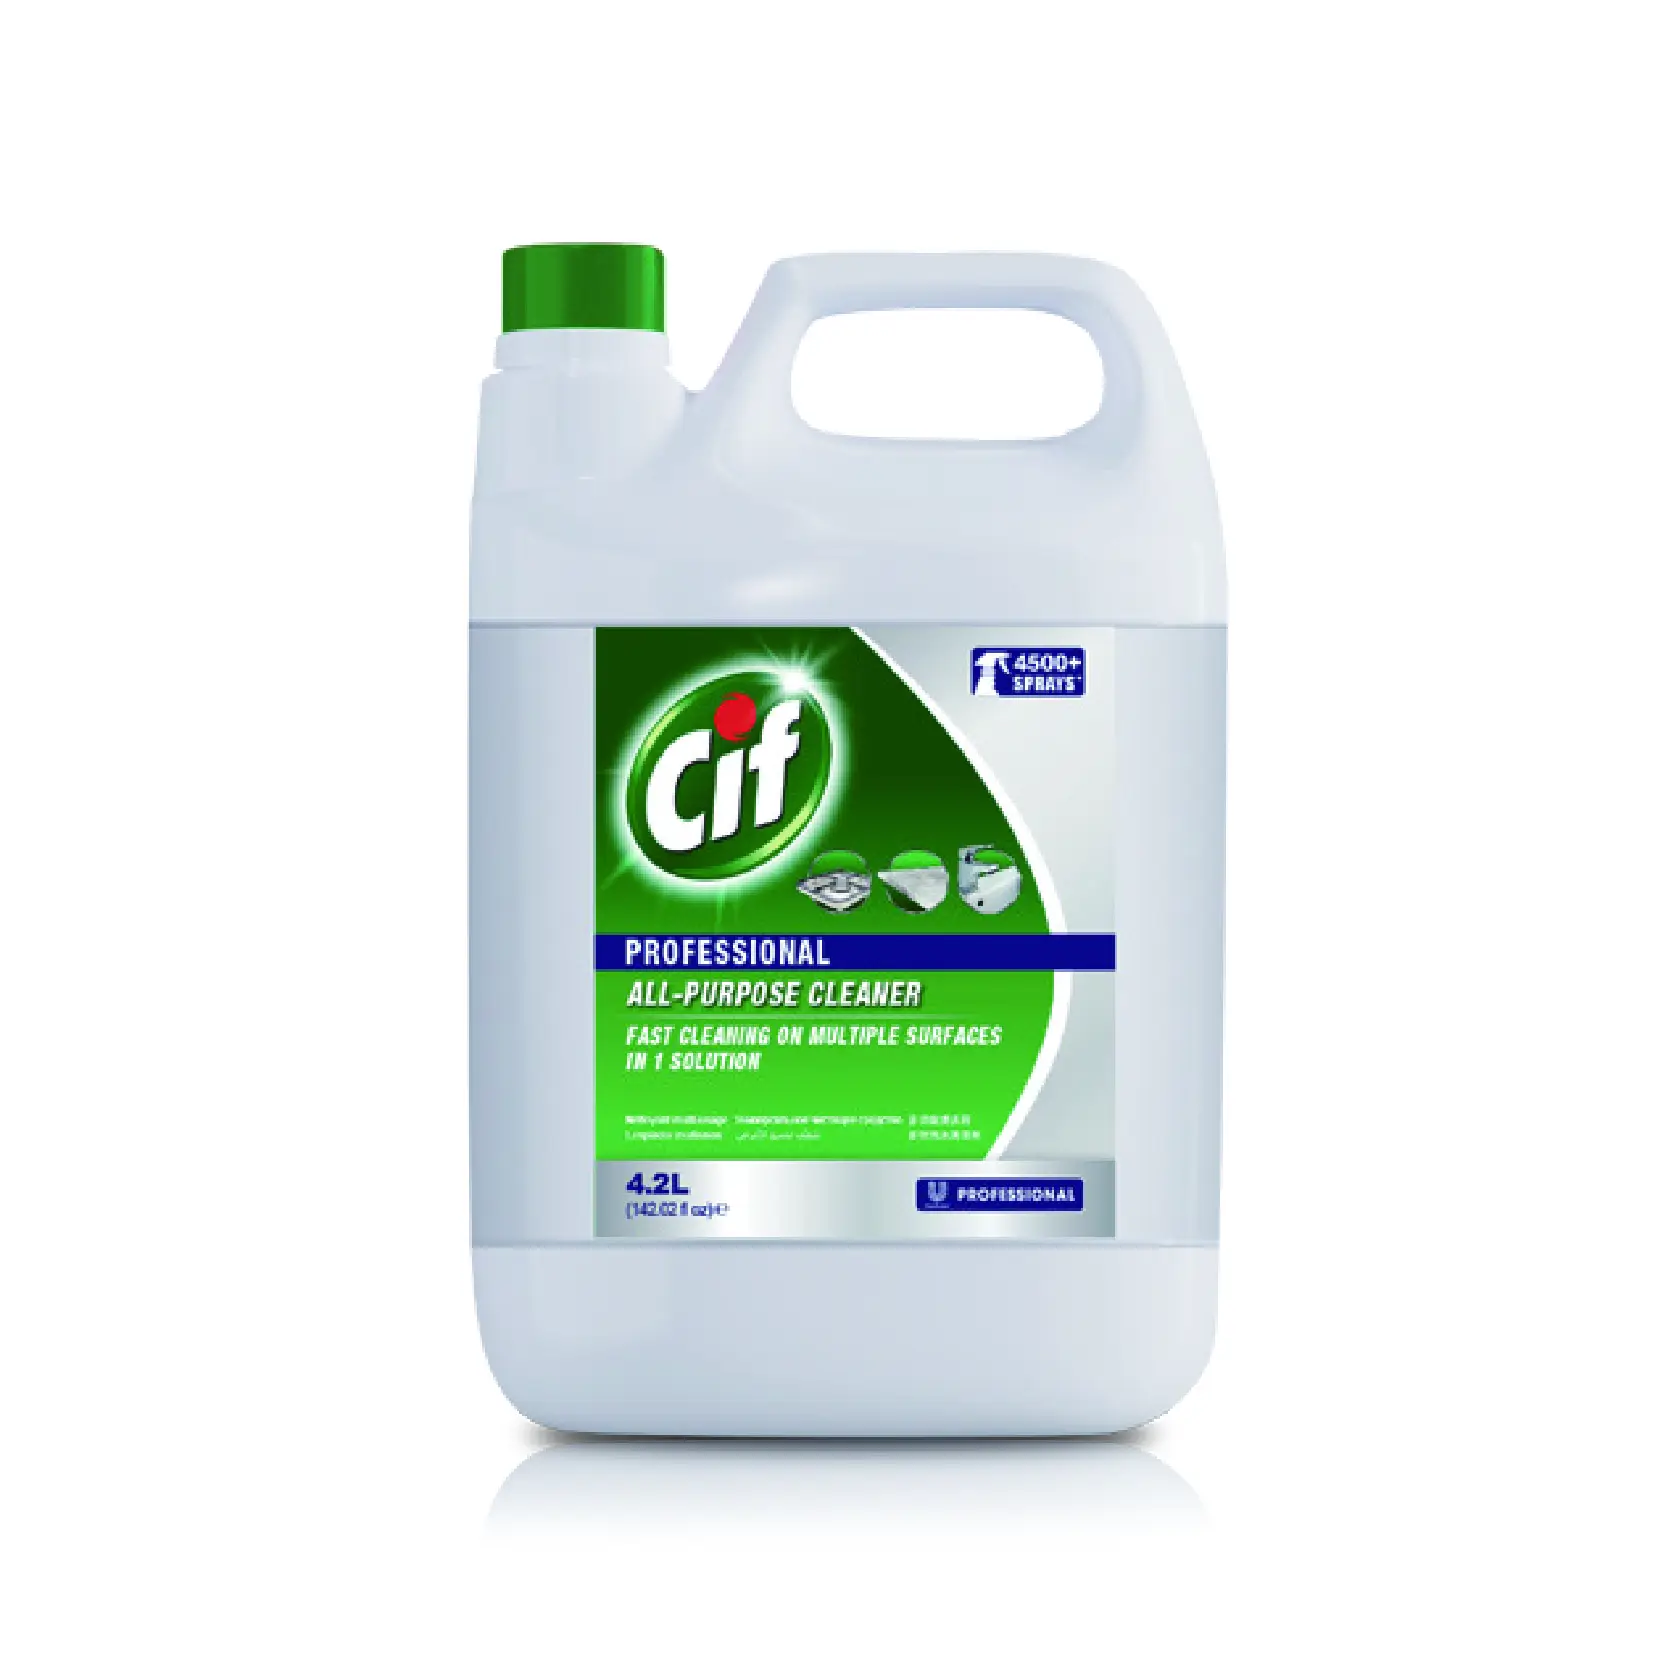 Wholesale Officially Authorized 4.2L Cif All Purpose Refill Cleaner